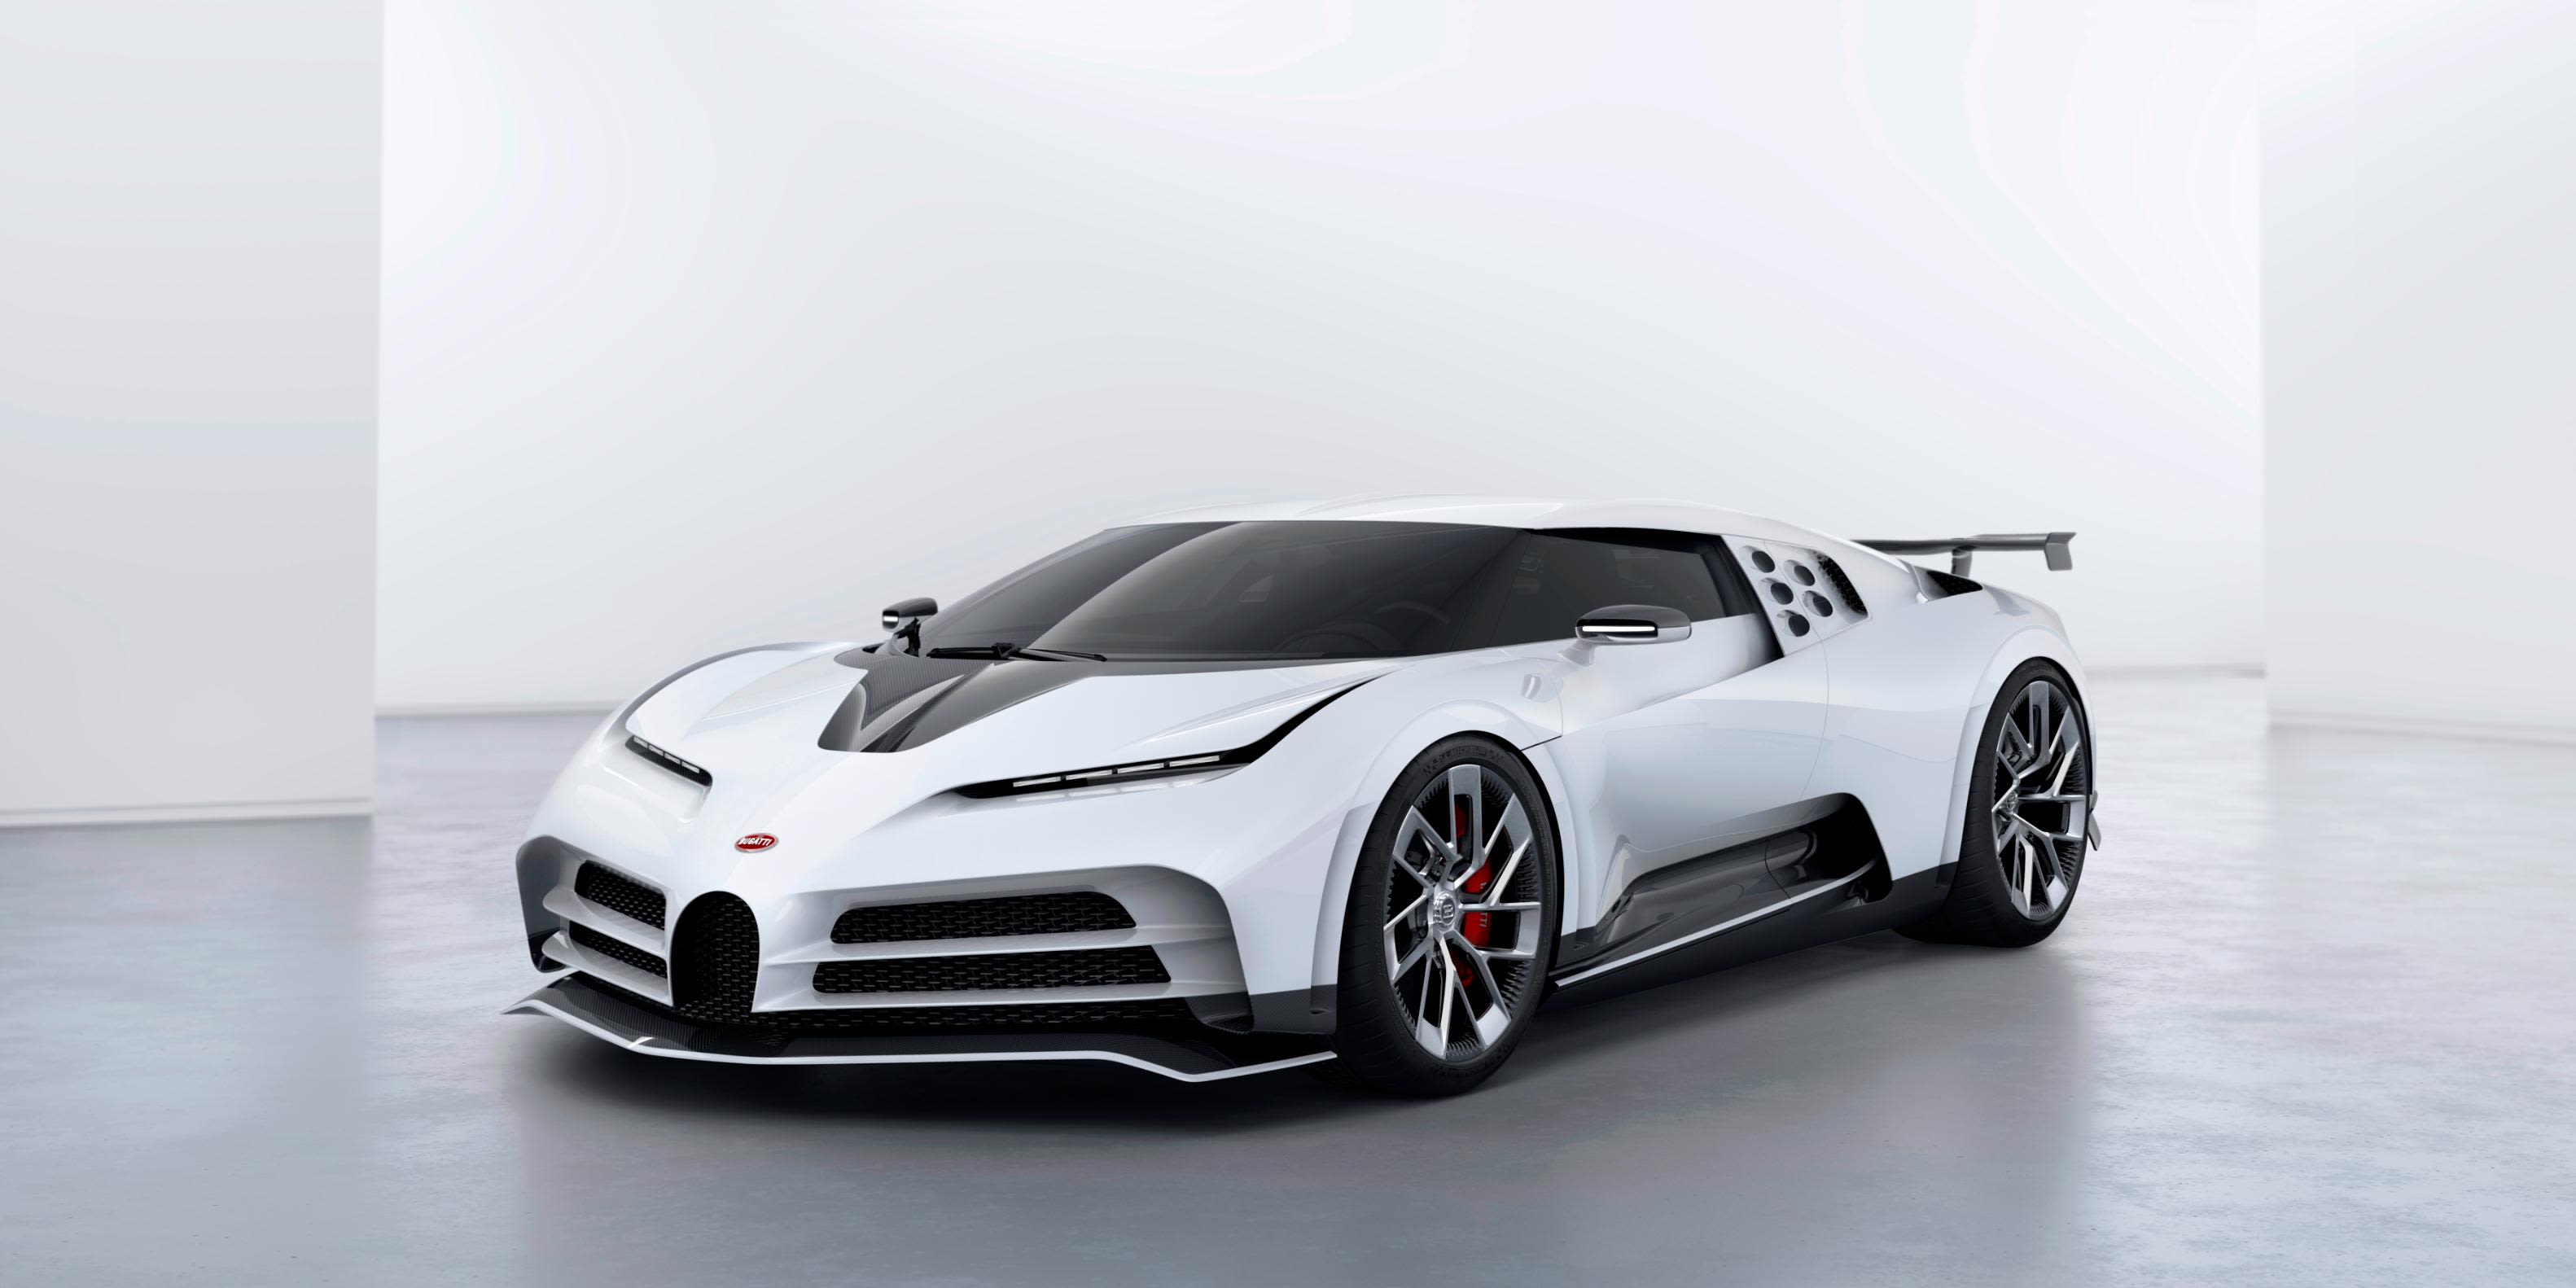 Bugatti is making only 10 of these $9 million supercars